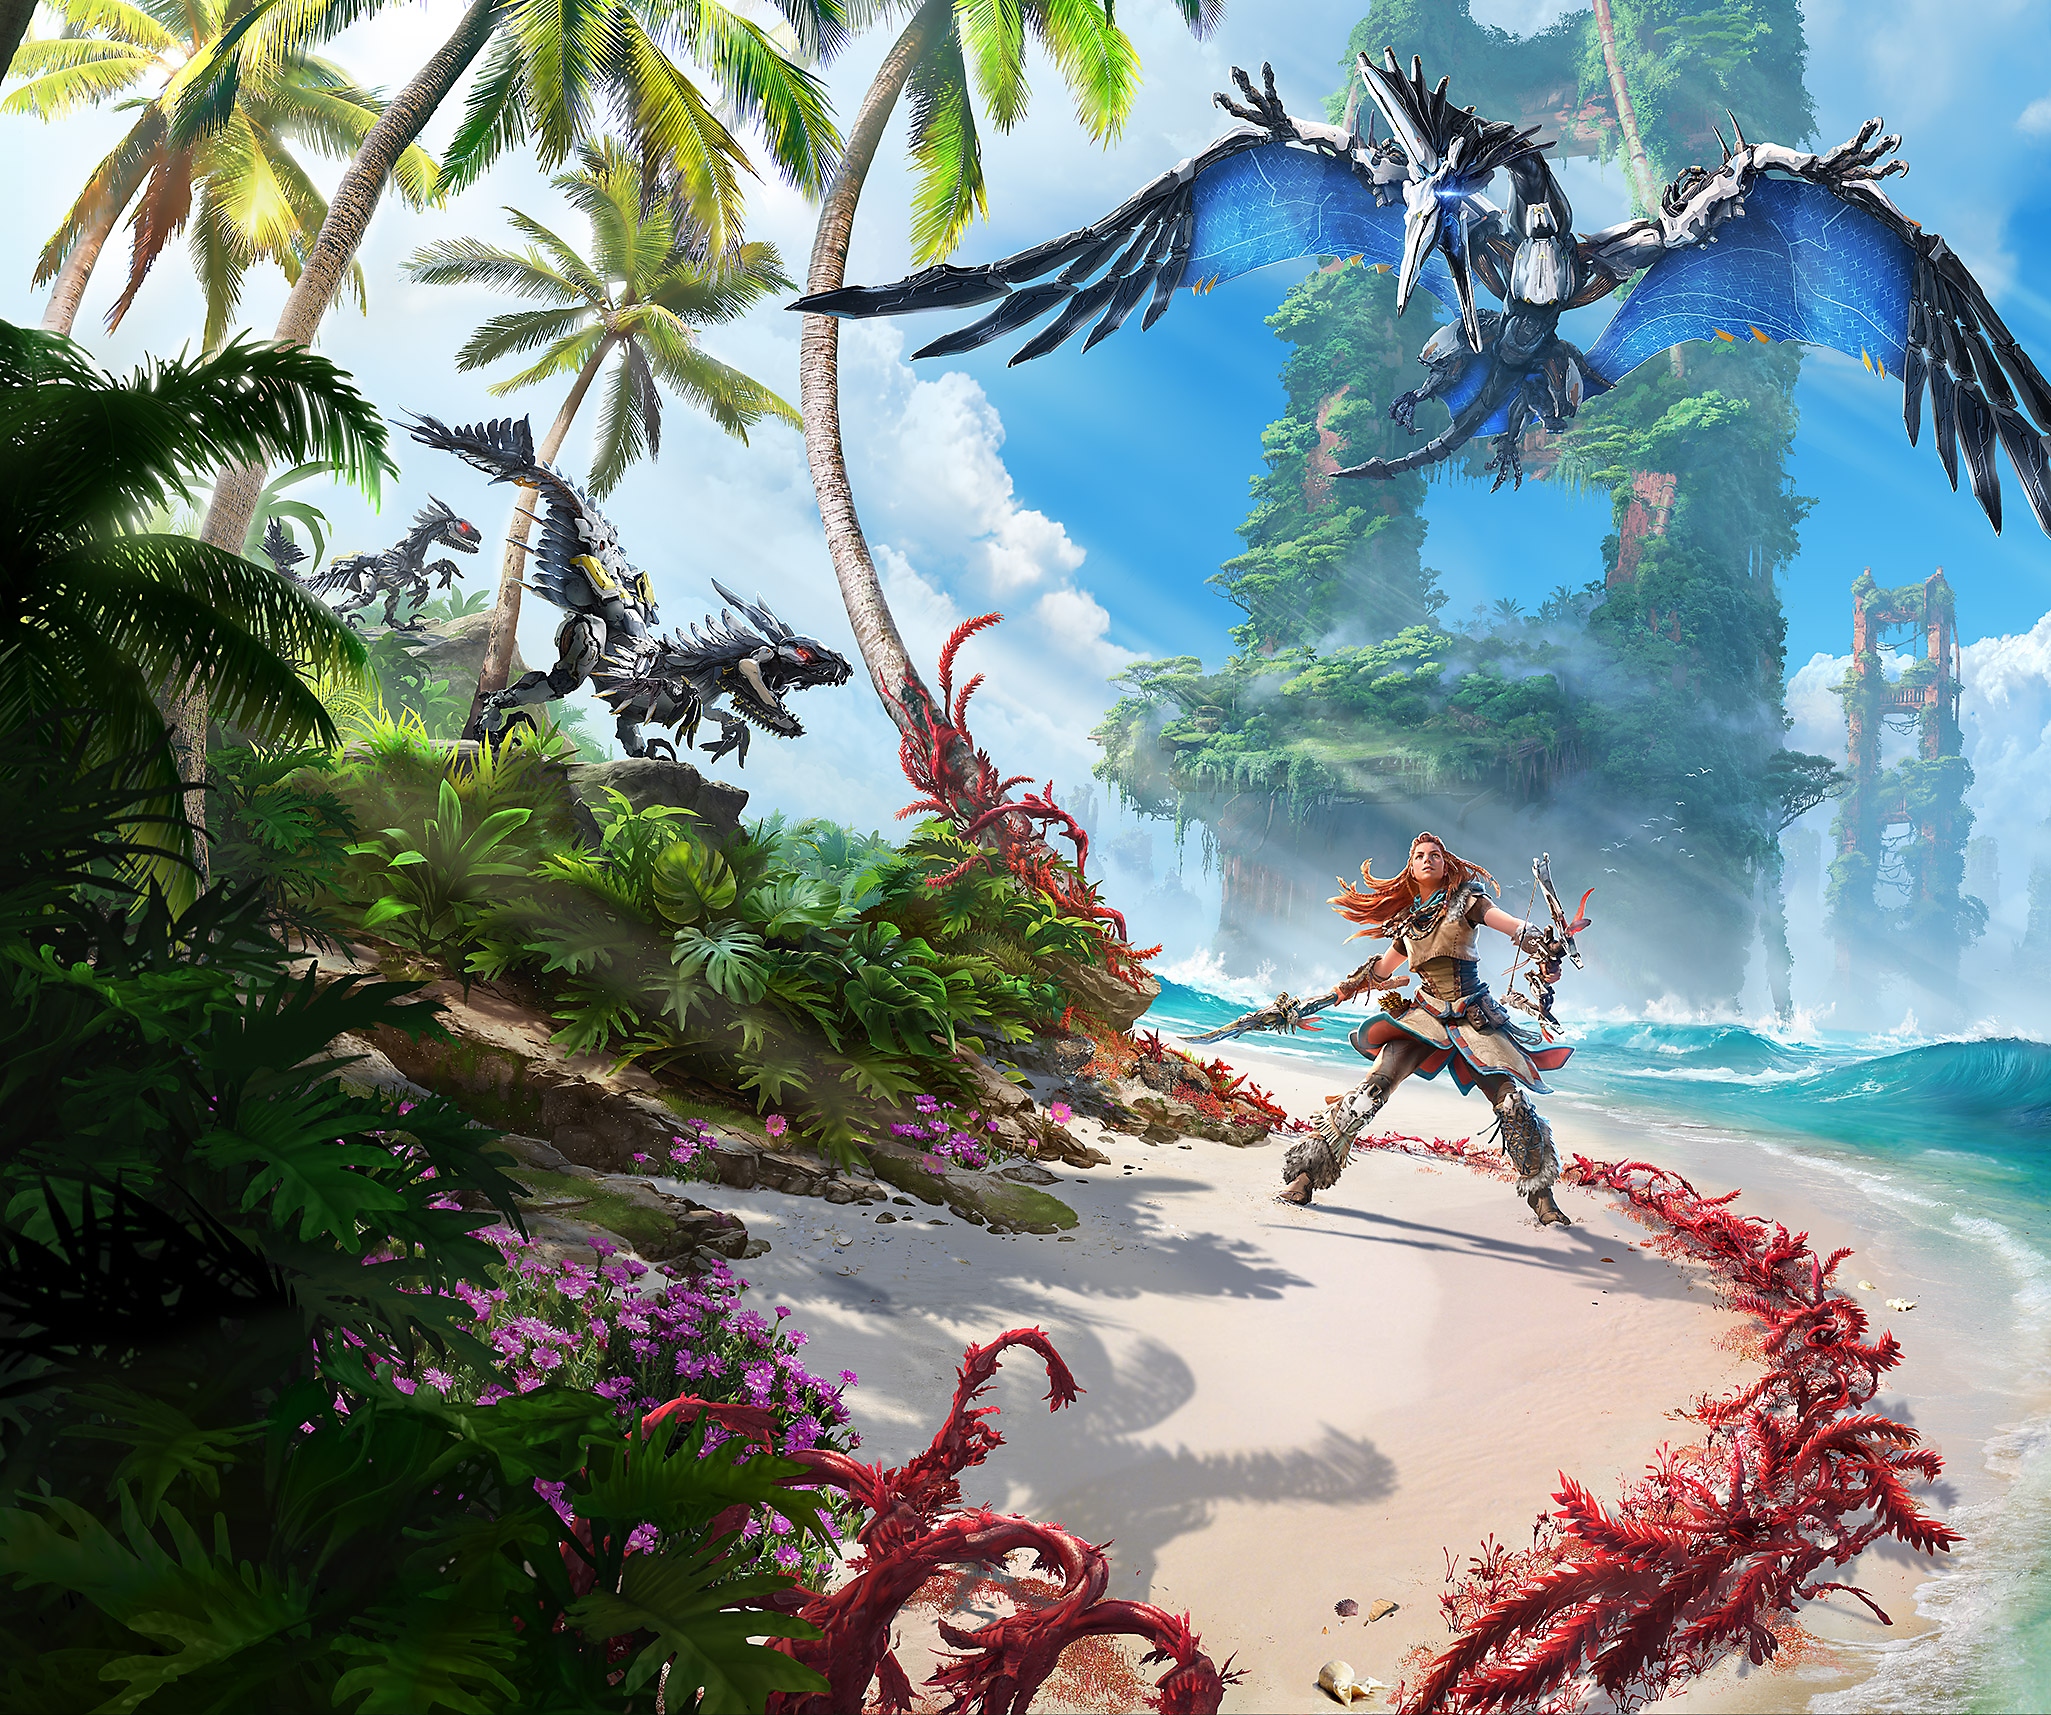 Horizon Forbidden West key art featuring Aloy stood on a beach in front of a ruined Golden Gate Bridge.